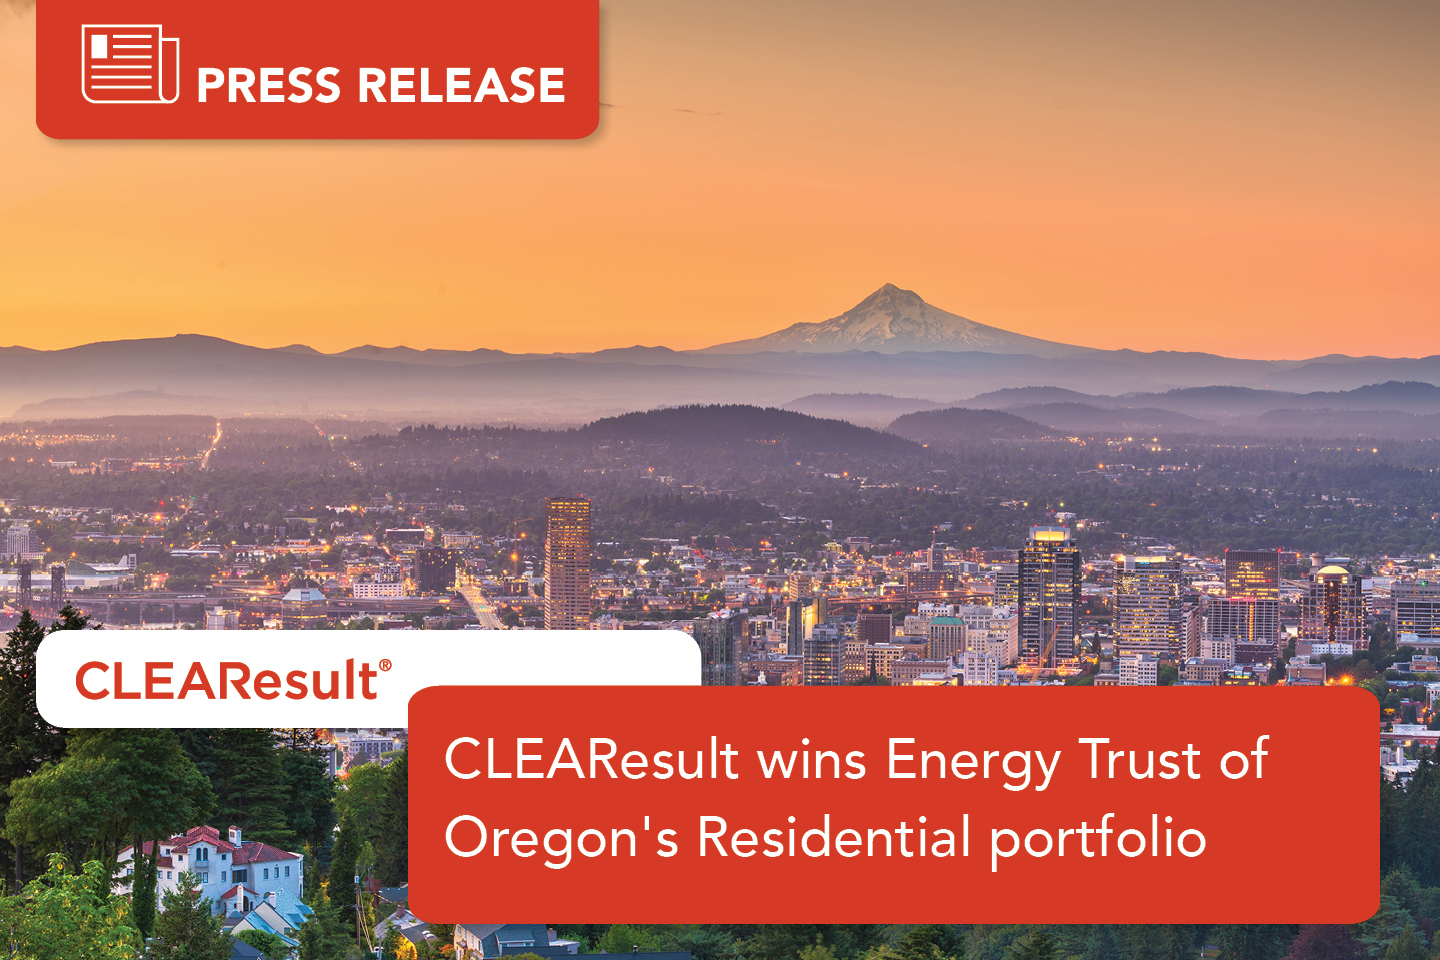 CLEAResult Awarded $12.5 Million in Residential Efficiency Contracts with Energy Trust of Oregon